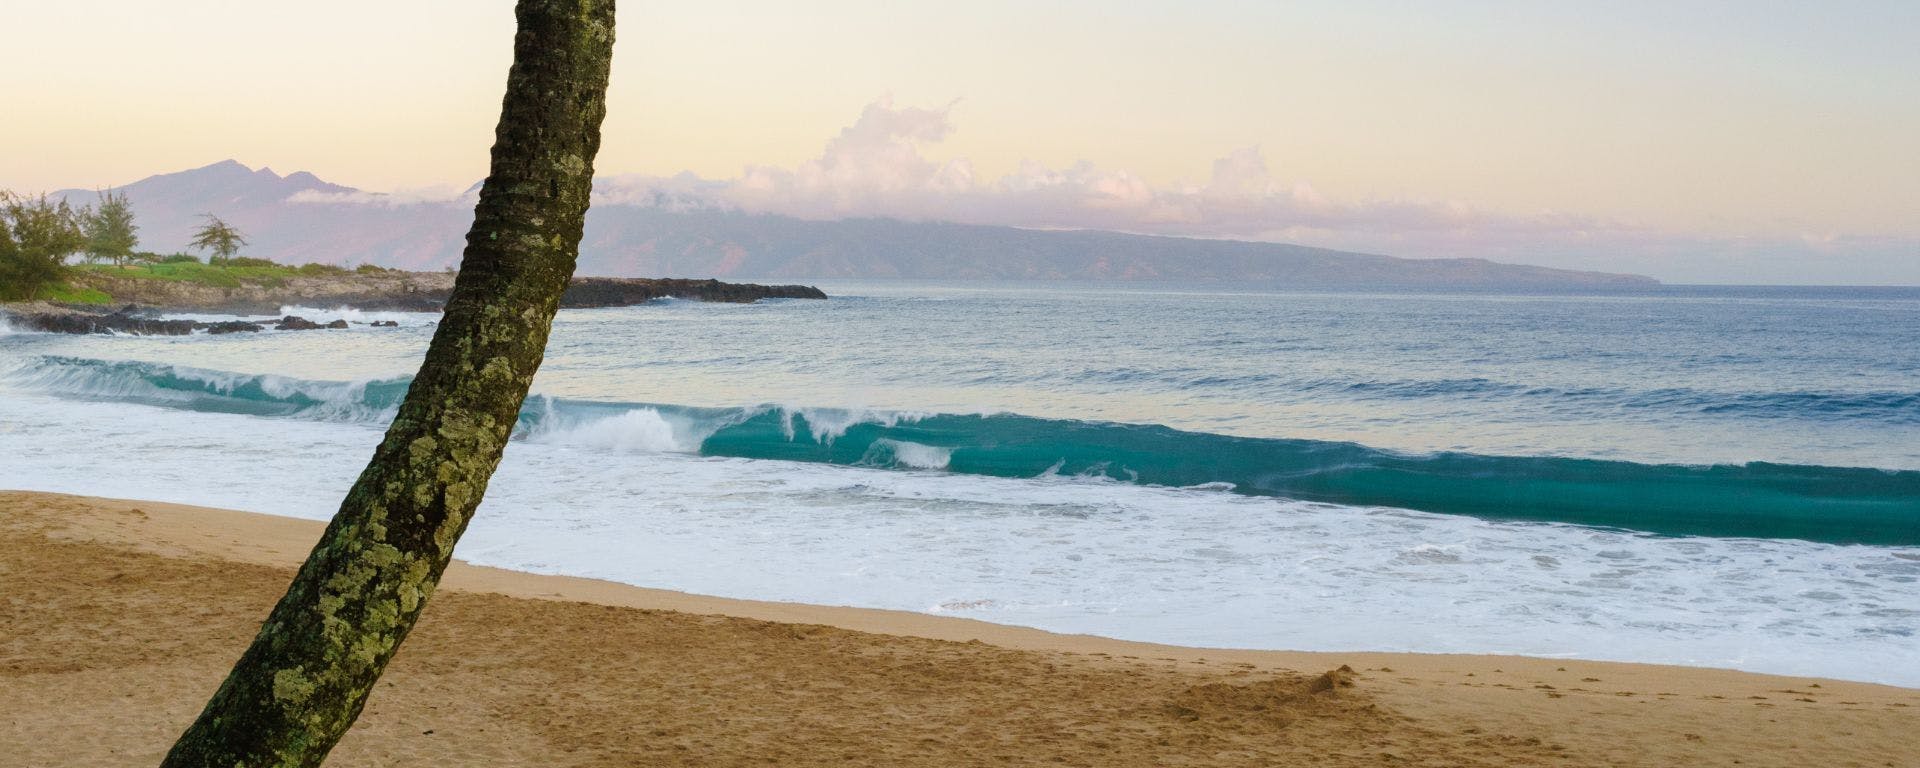 Coworking, Coliving and Surfing in Lahaina, Maui (Hawaii)